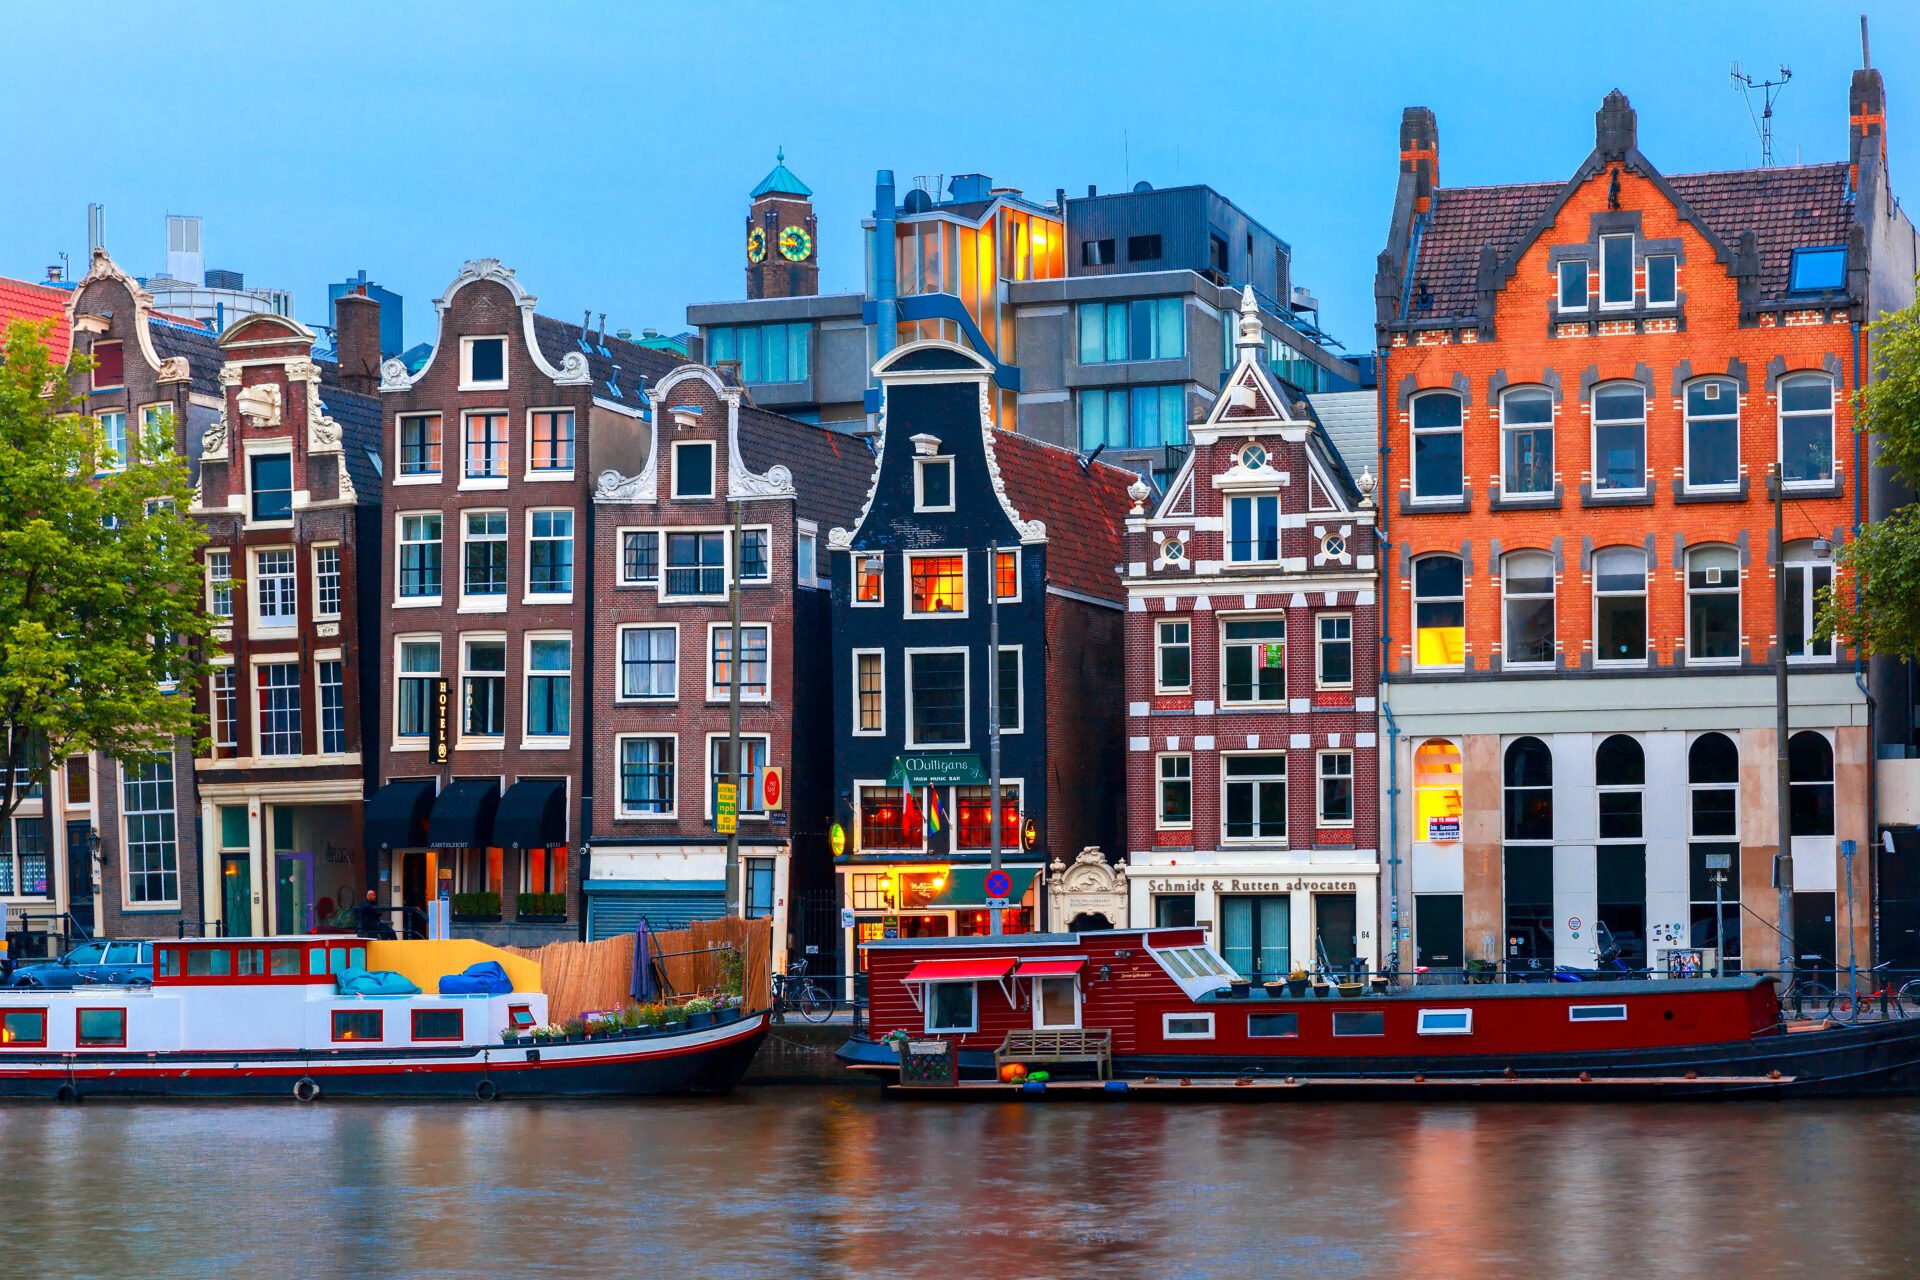 Dutch-Style Mortgages: Could They Work In America?